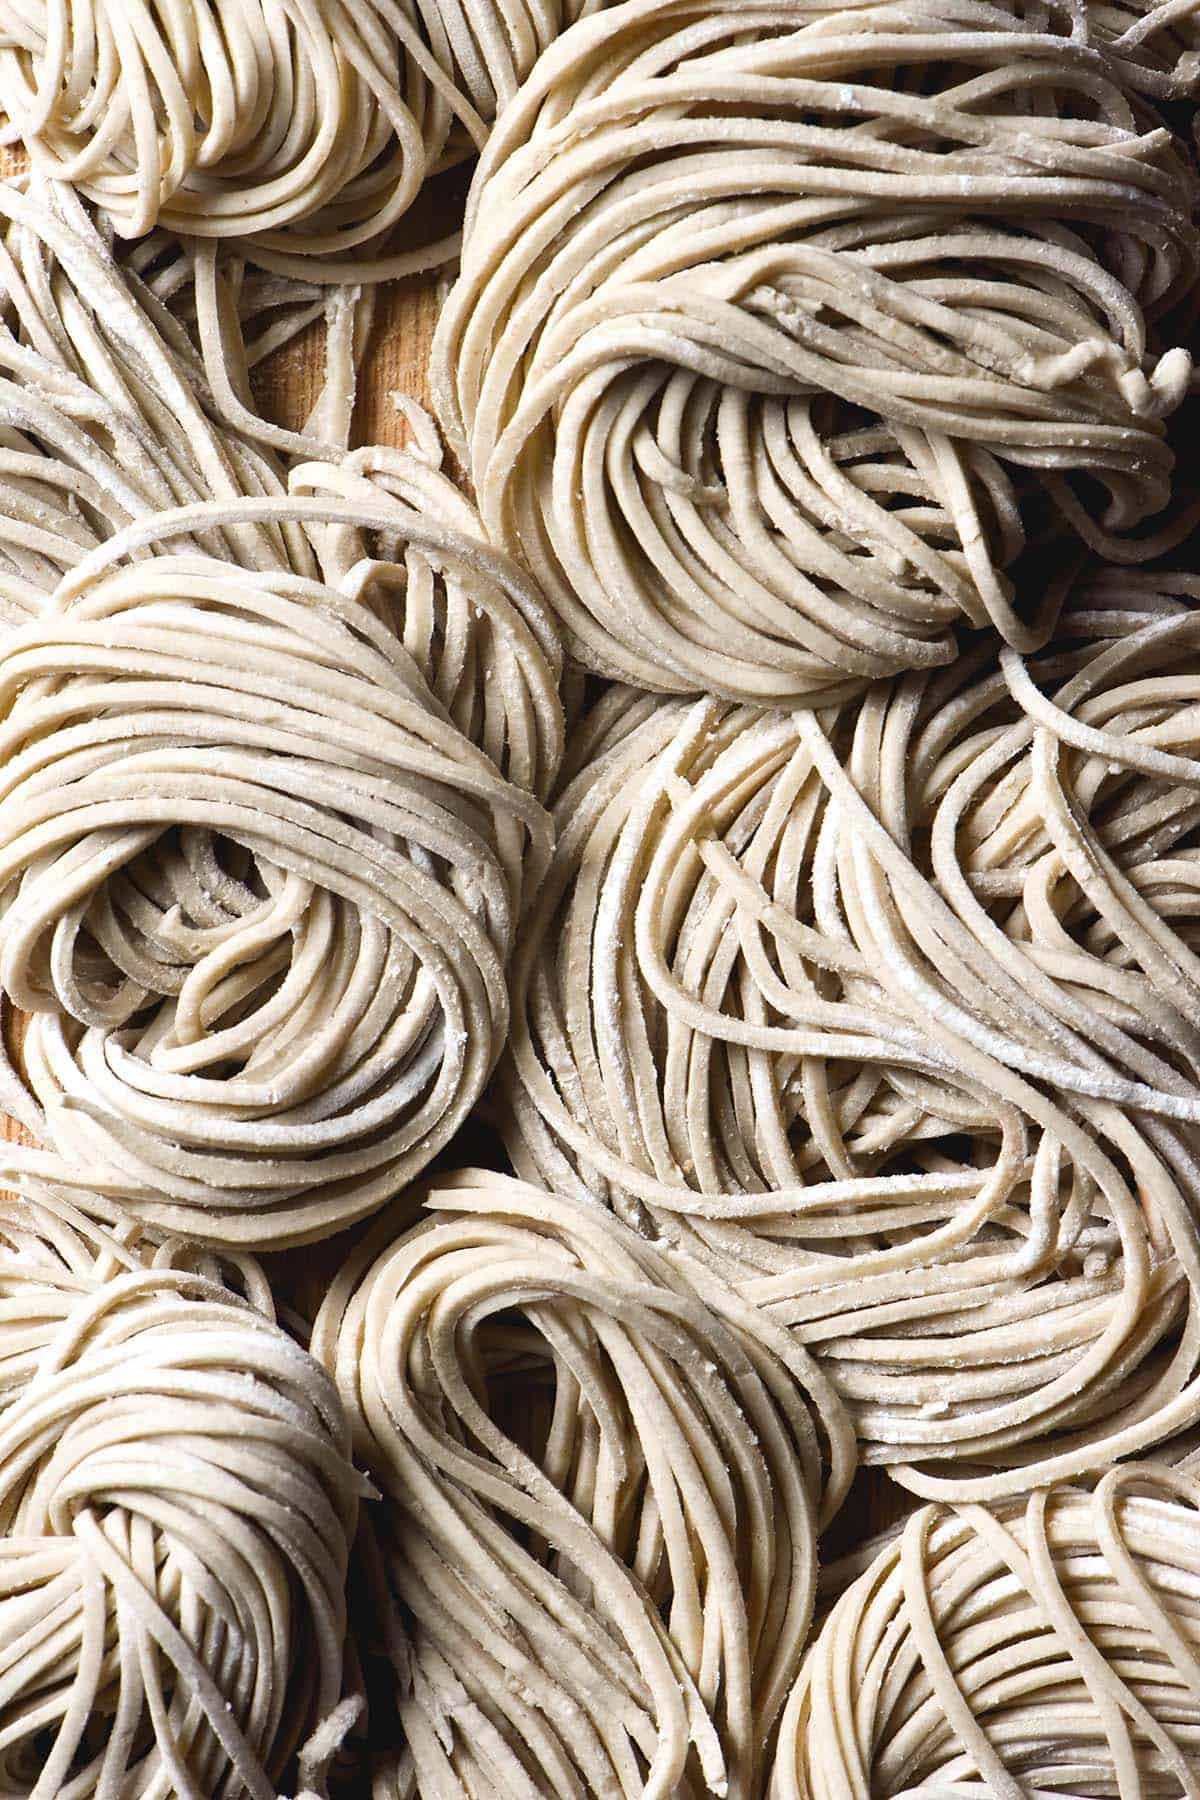 An aerial macro image of swirled raw strands of gluten free buckwheat noodles on a wooden board. 